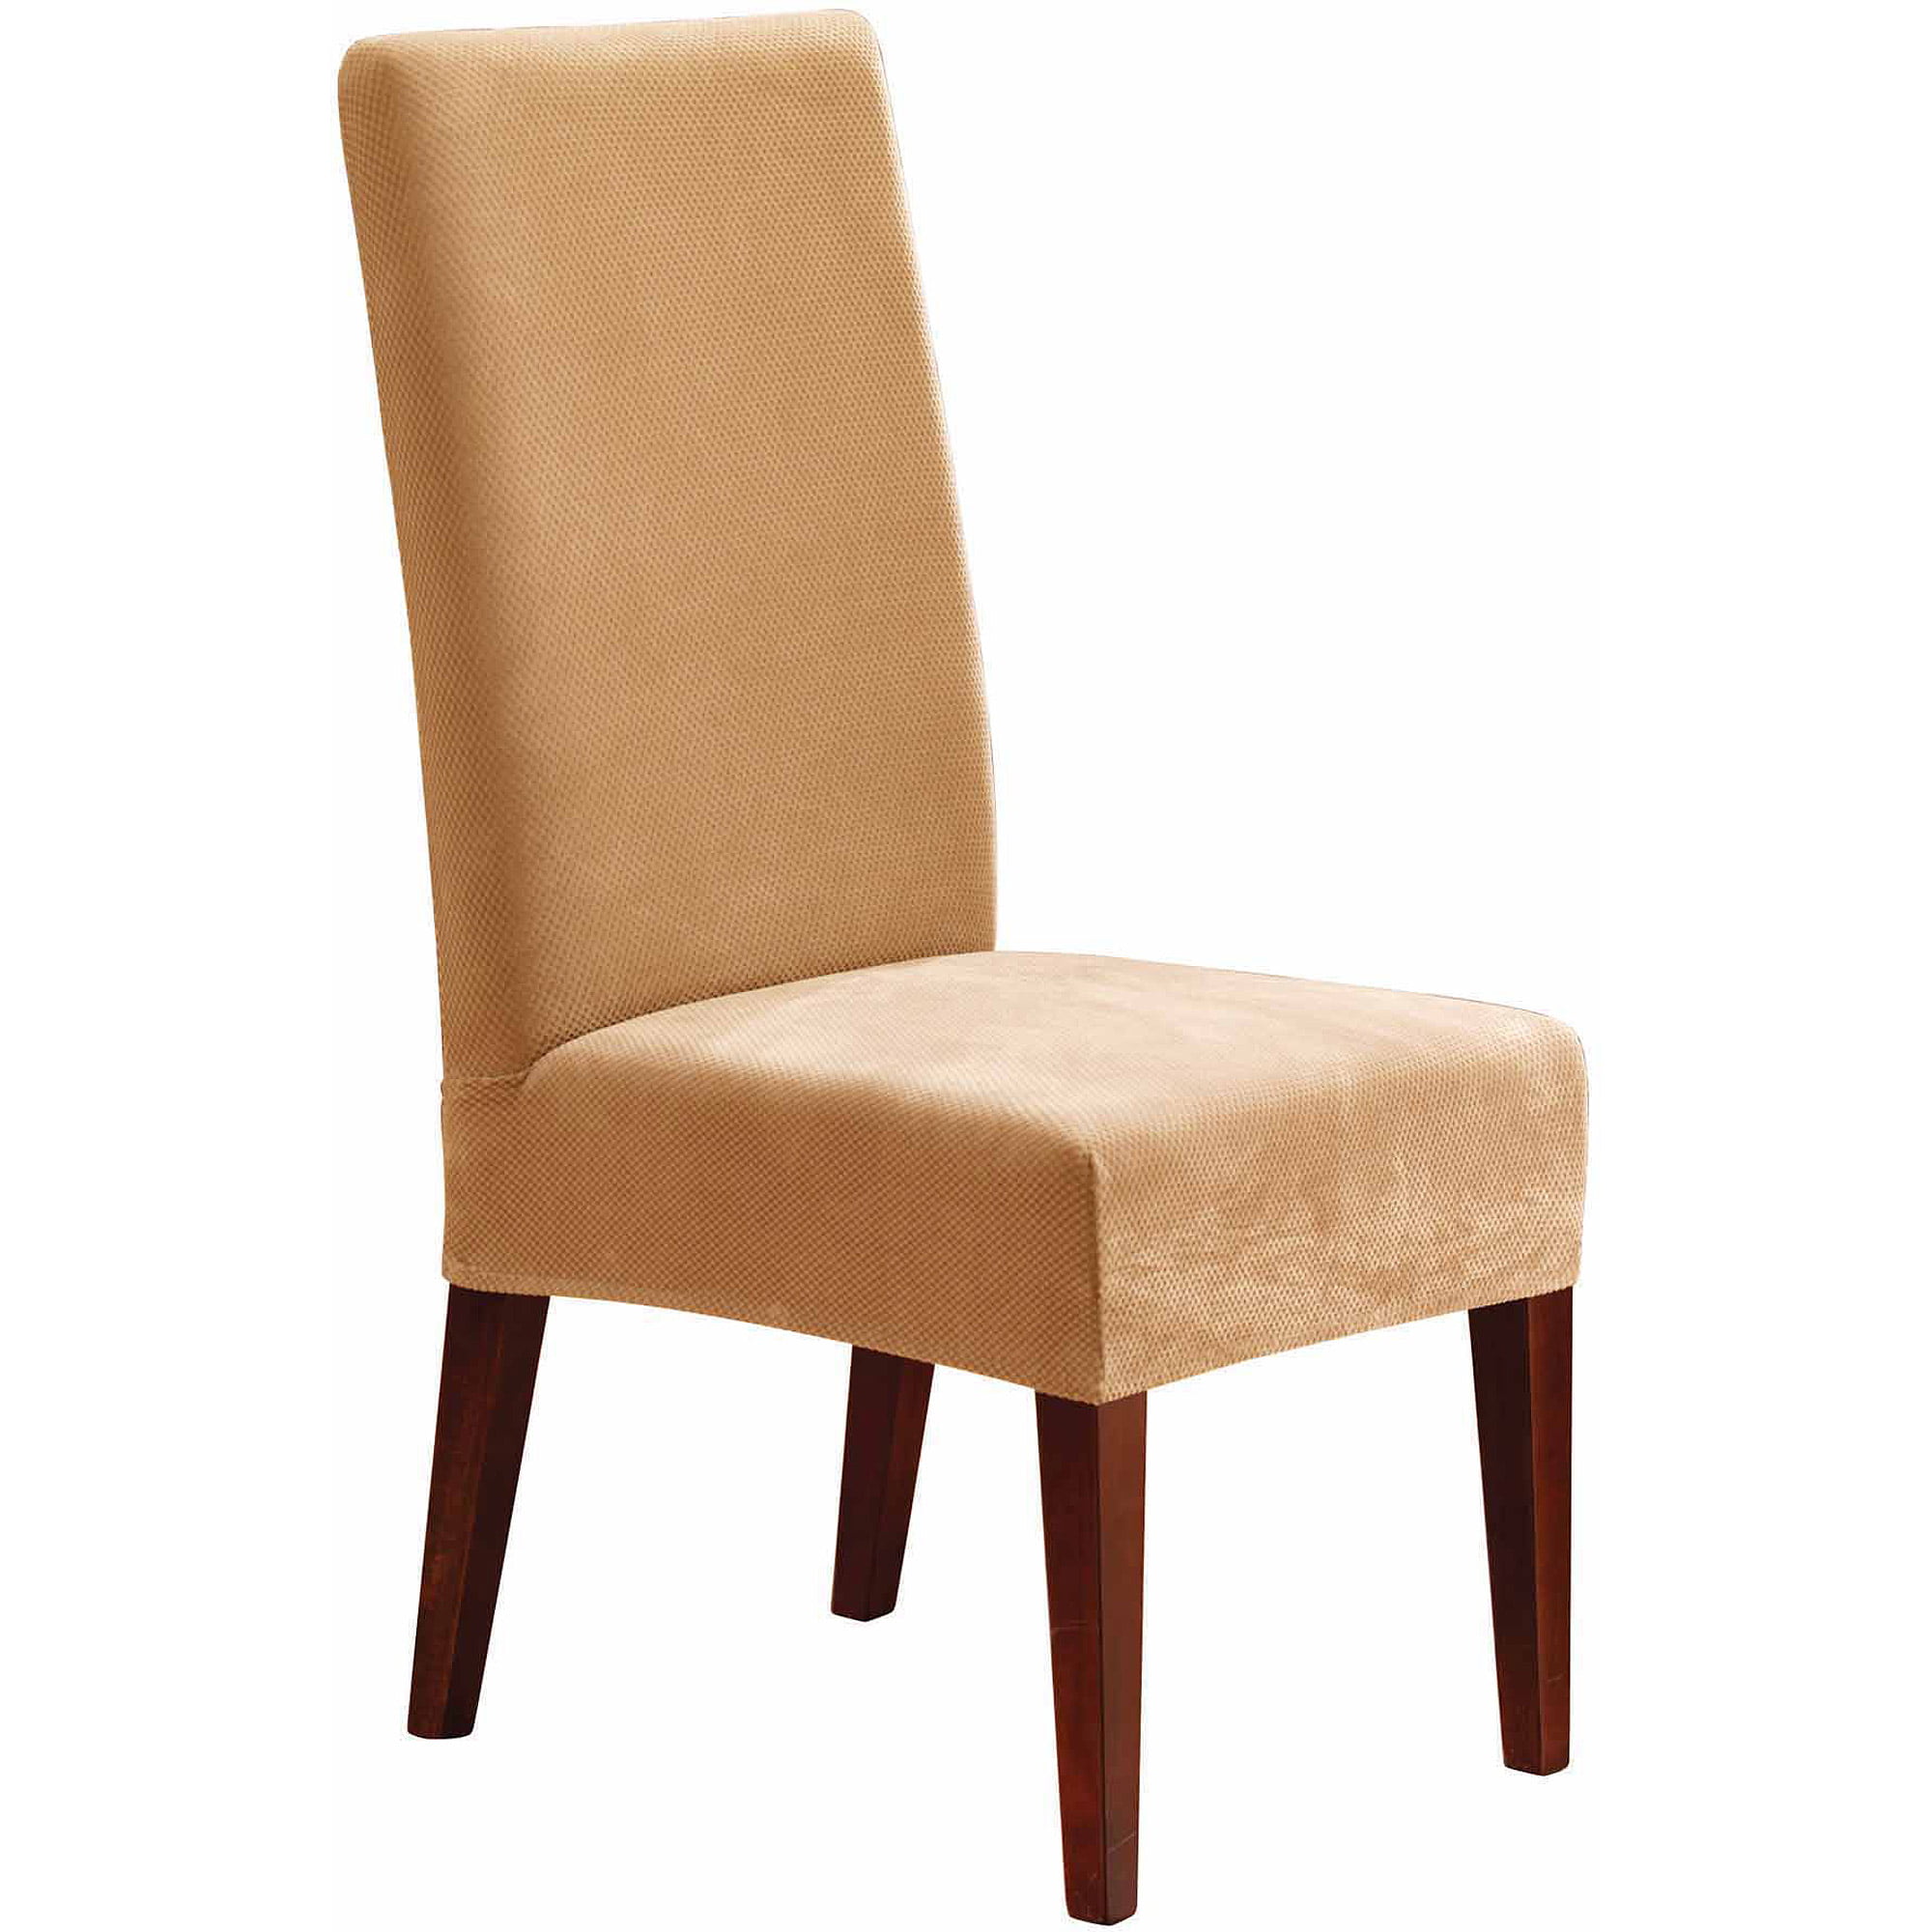 Sure Fit Stretch Pique Short Dining Room Chair Slipcover Walmartcom